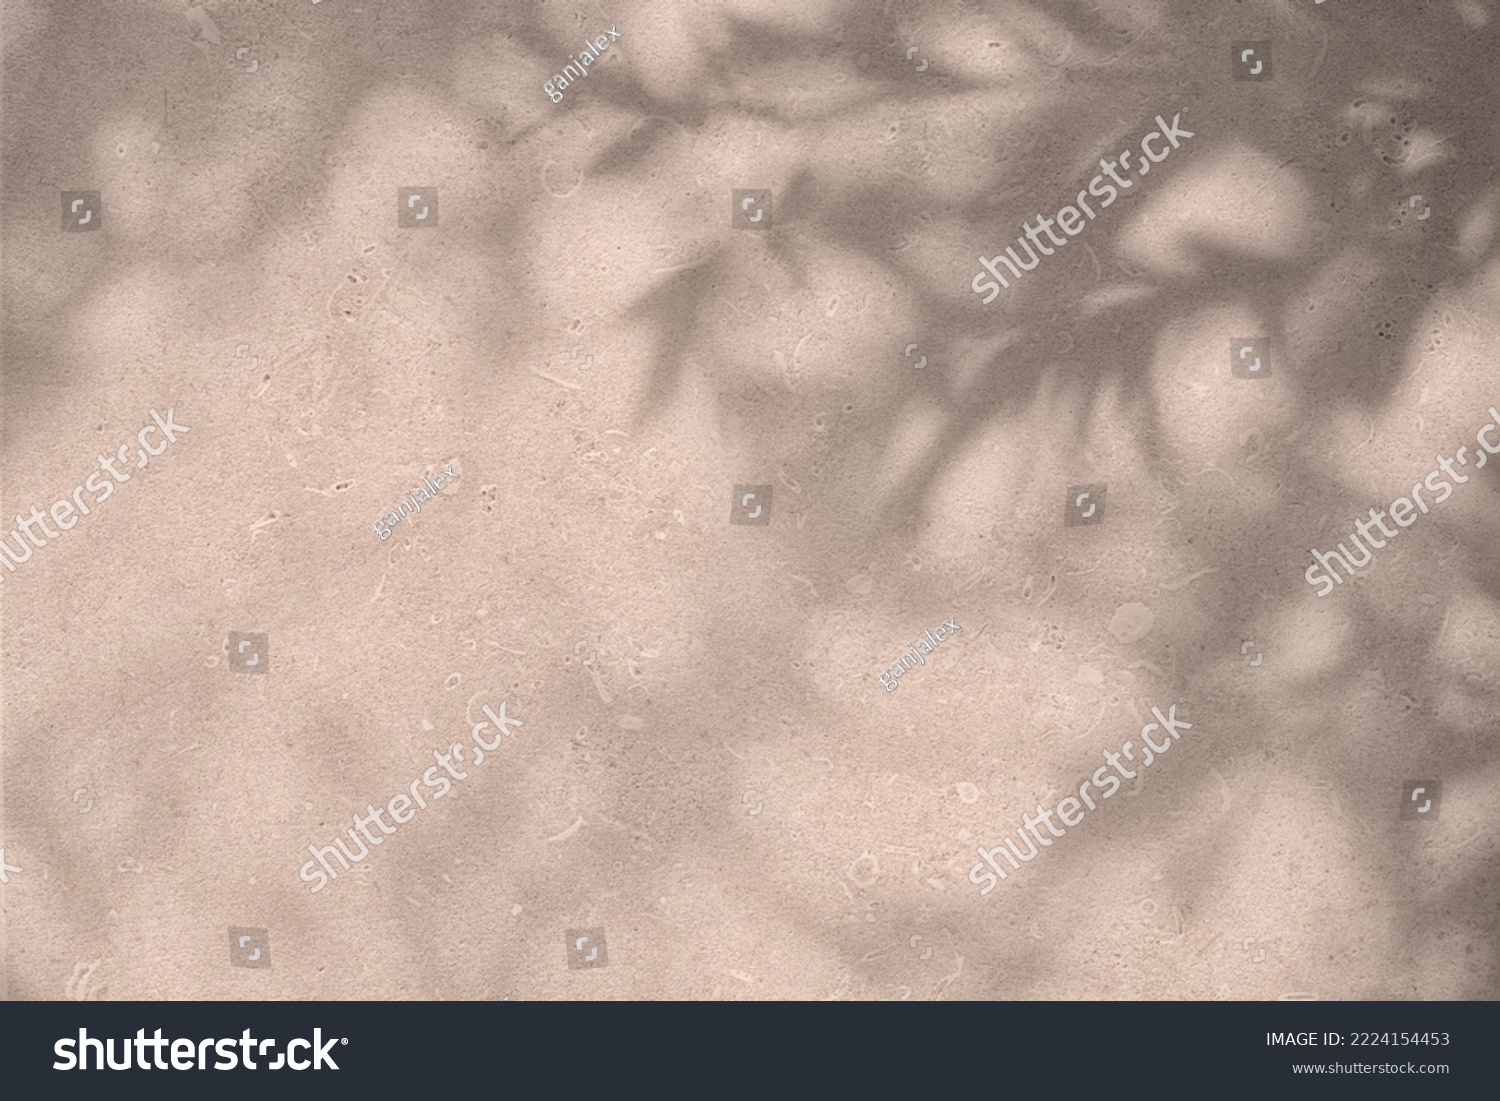 Shadow of leaves and flowers on pink concrete wall texture with roughness and irregularities. Abstract trendy colored nature concept background. Copy space for text overlay, poster mockup flat lay  #2224154453